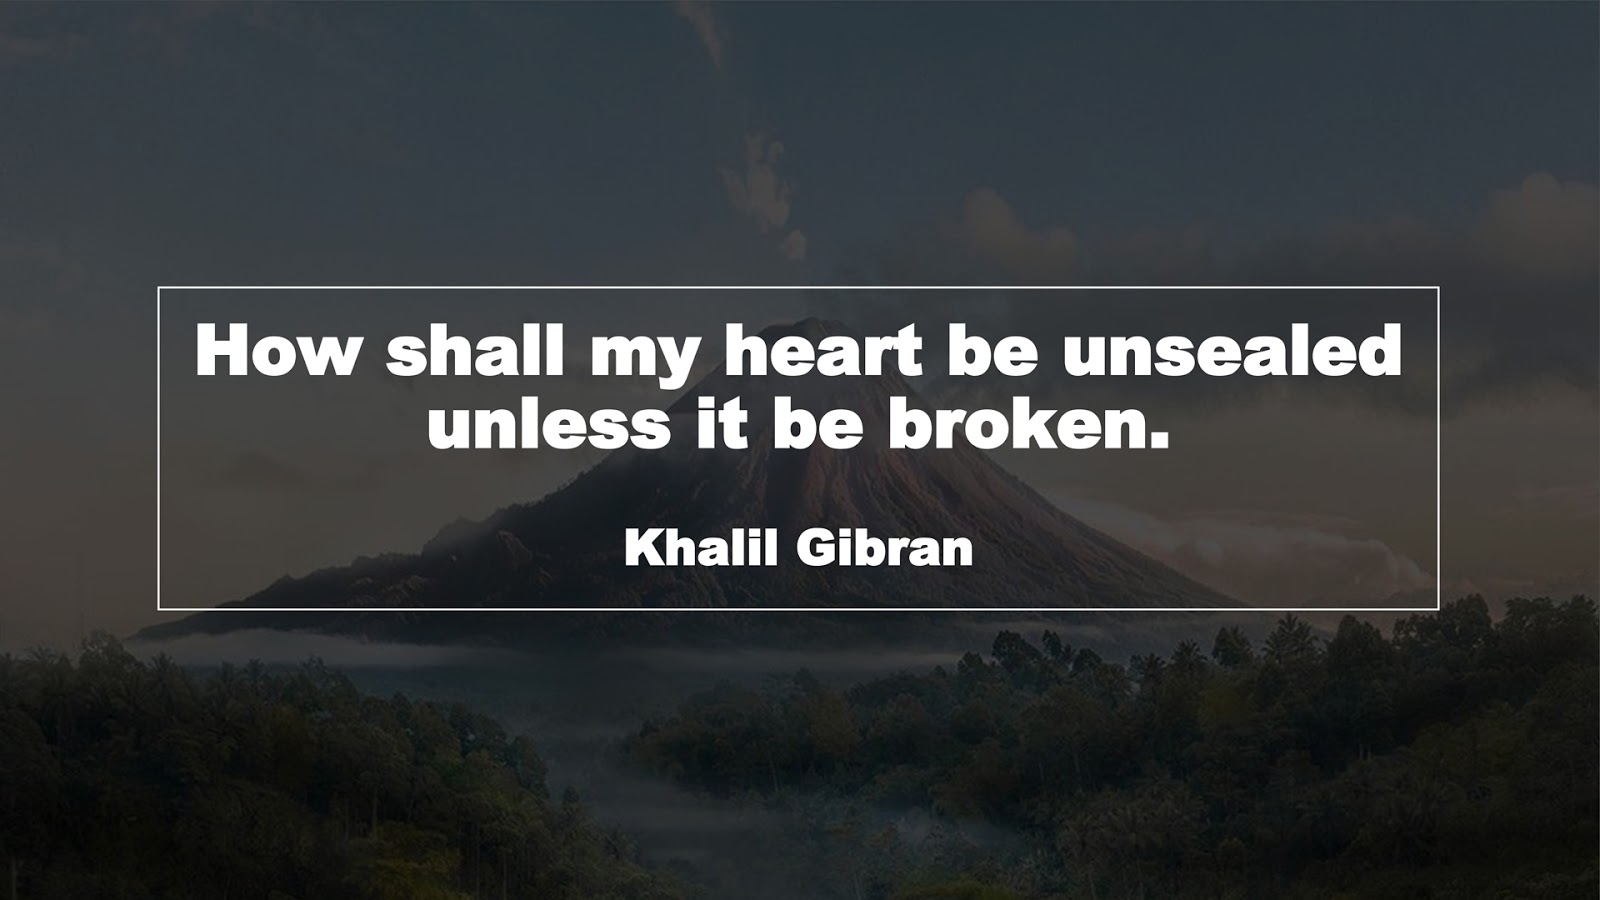 How shall my heart be unsealed unless it be broken. (Khalil Gibran)